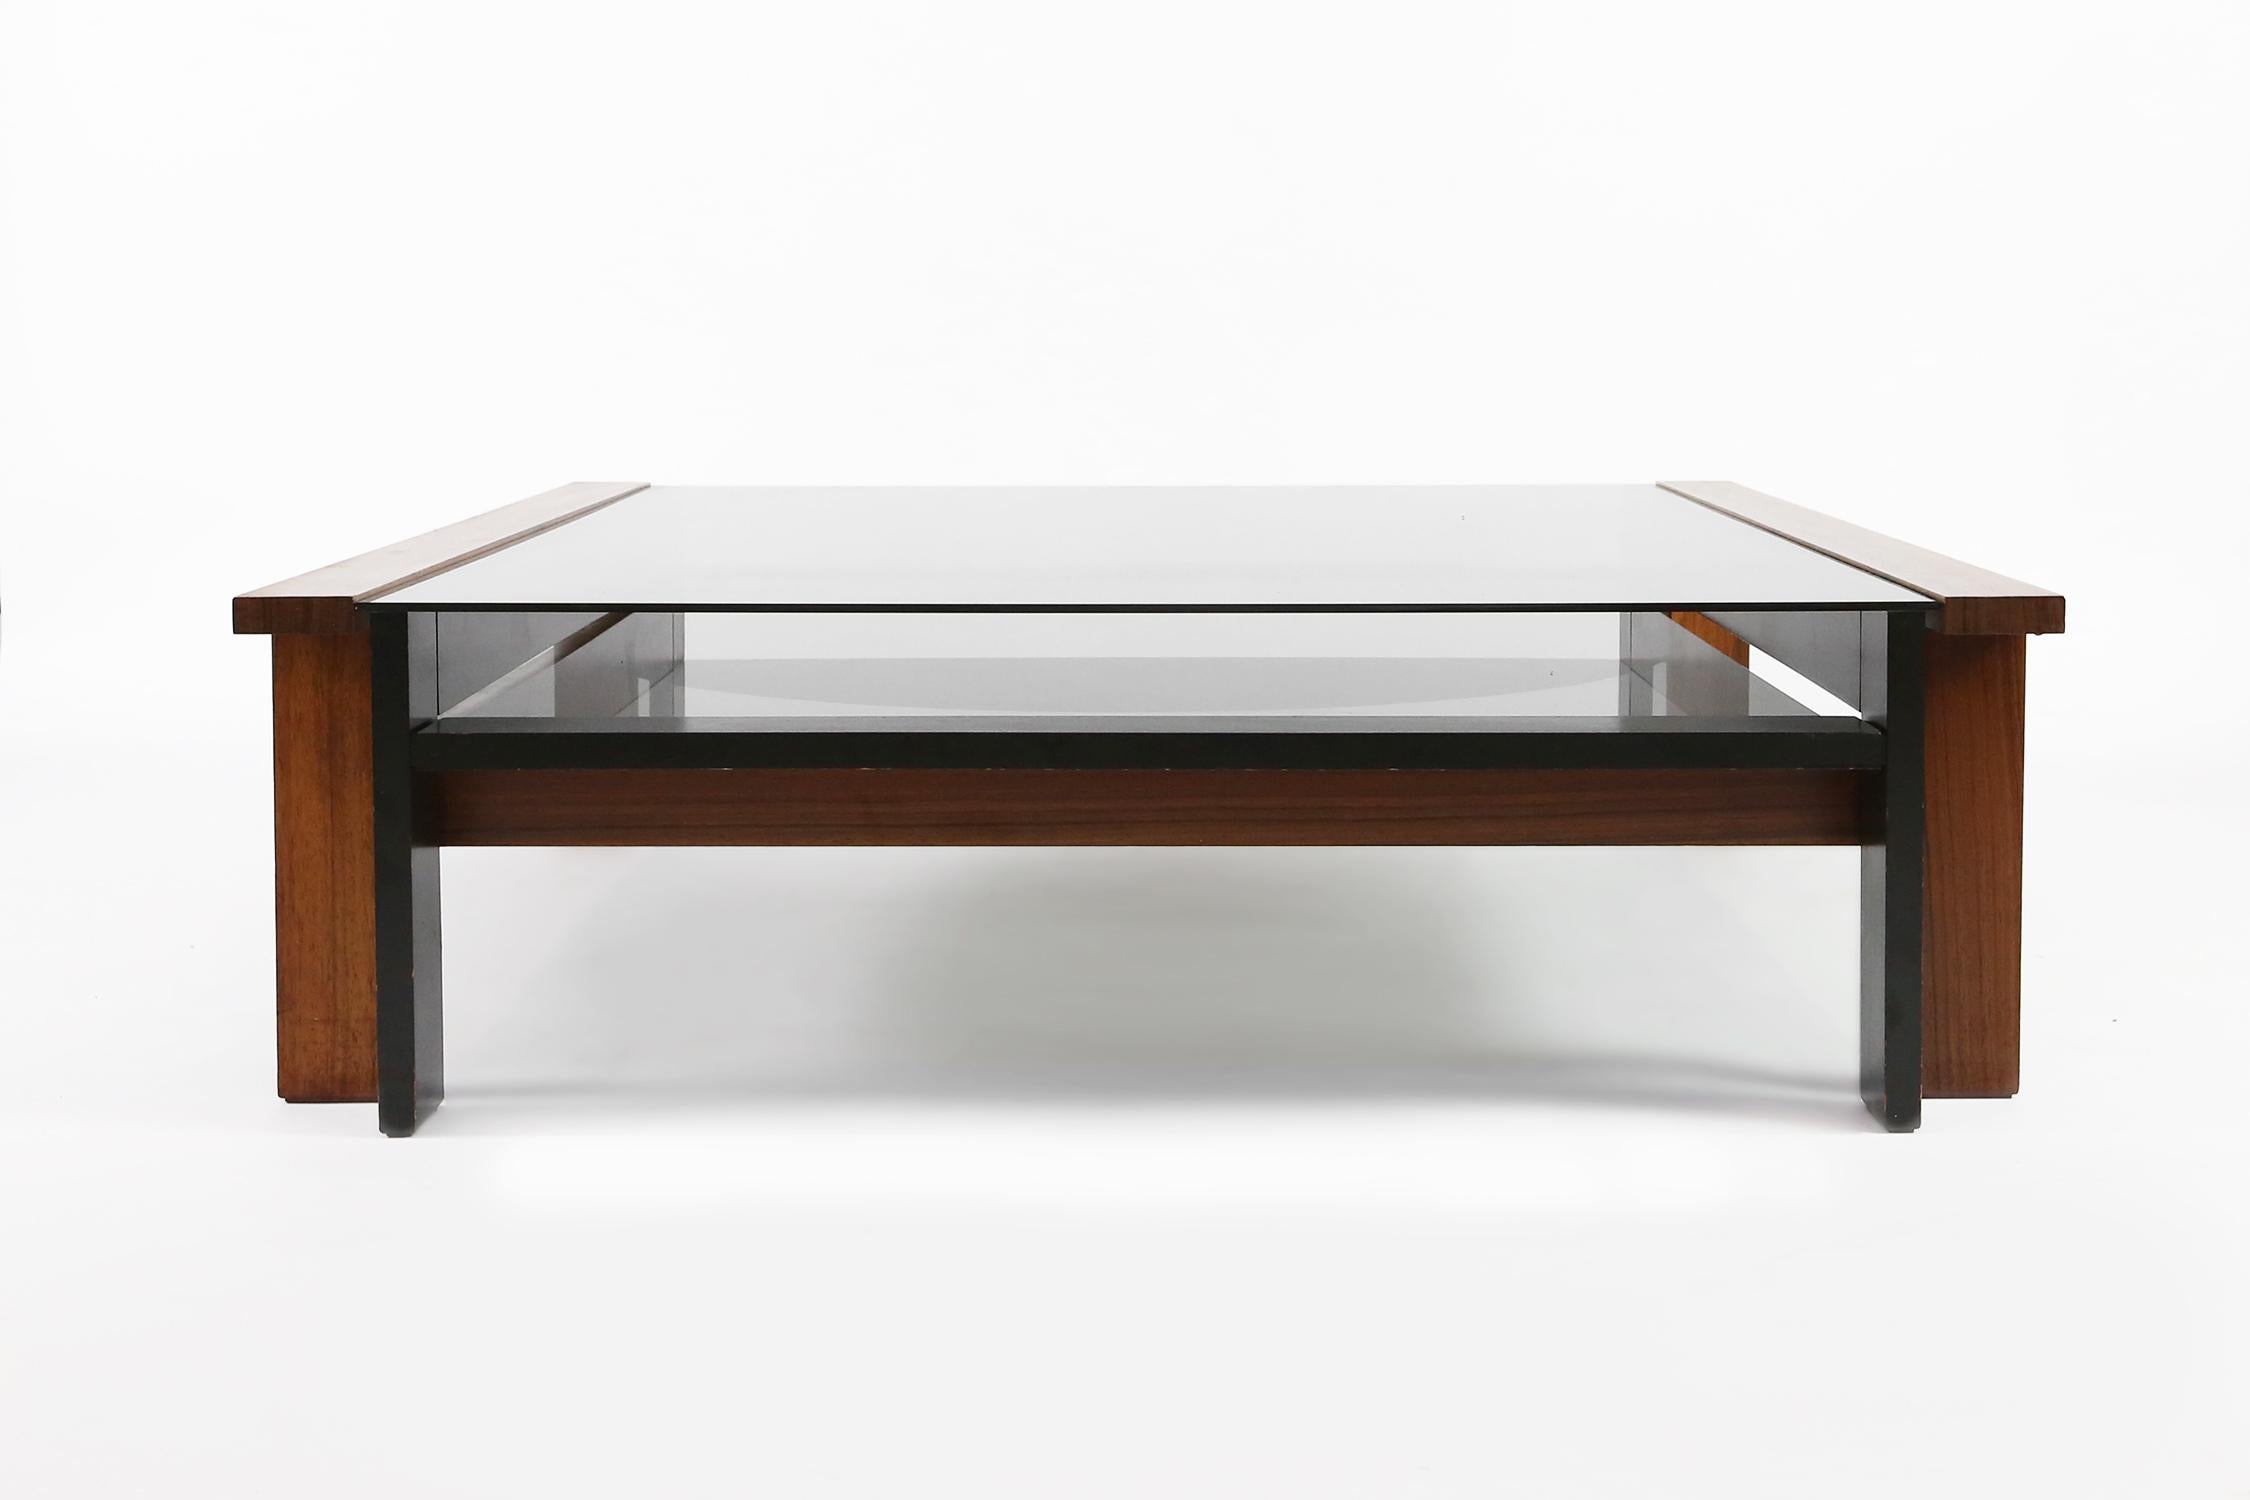 Exclusive coffee table designed by Pieter De Bruyne. The table dates from 1965, and has been produced in a very limited edition.
This table is made of Padauk wood, a part of the structure is ebonized. Structure in two levels. Fumed glass, lower